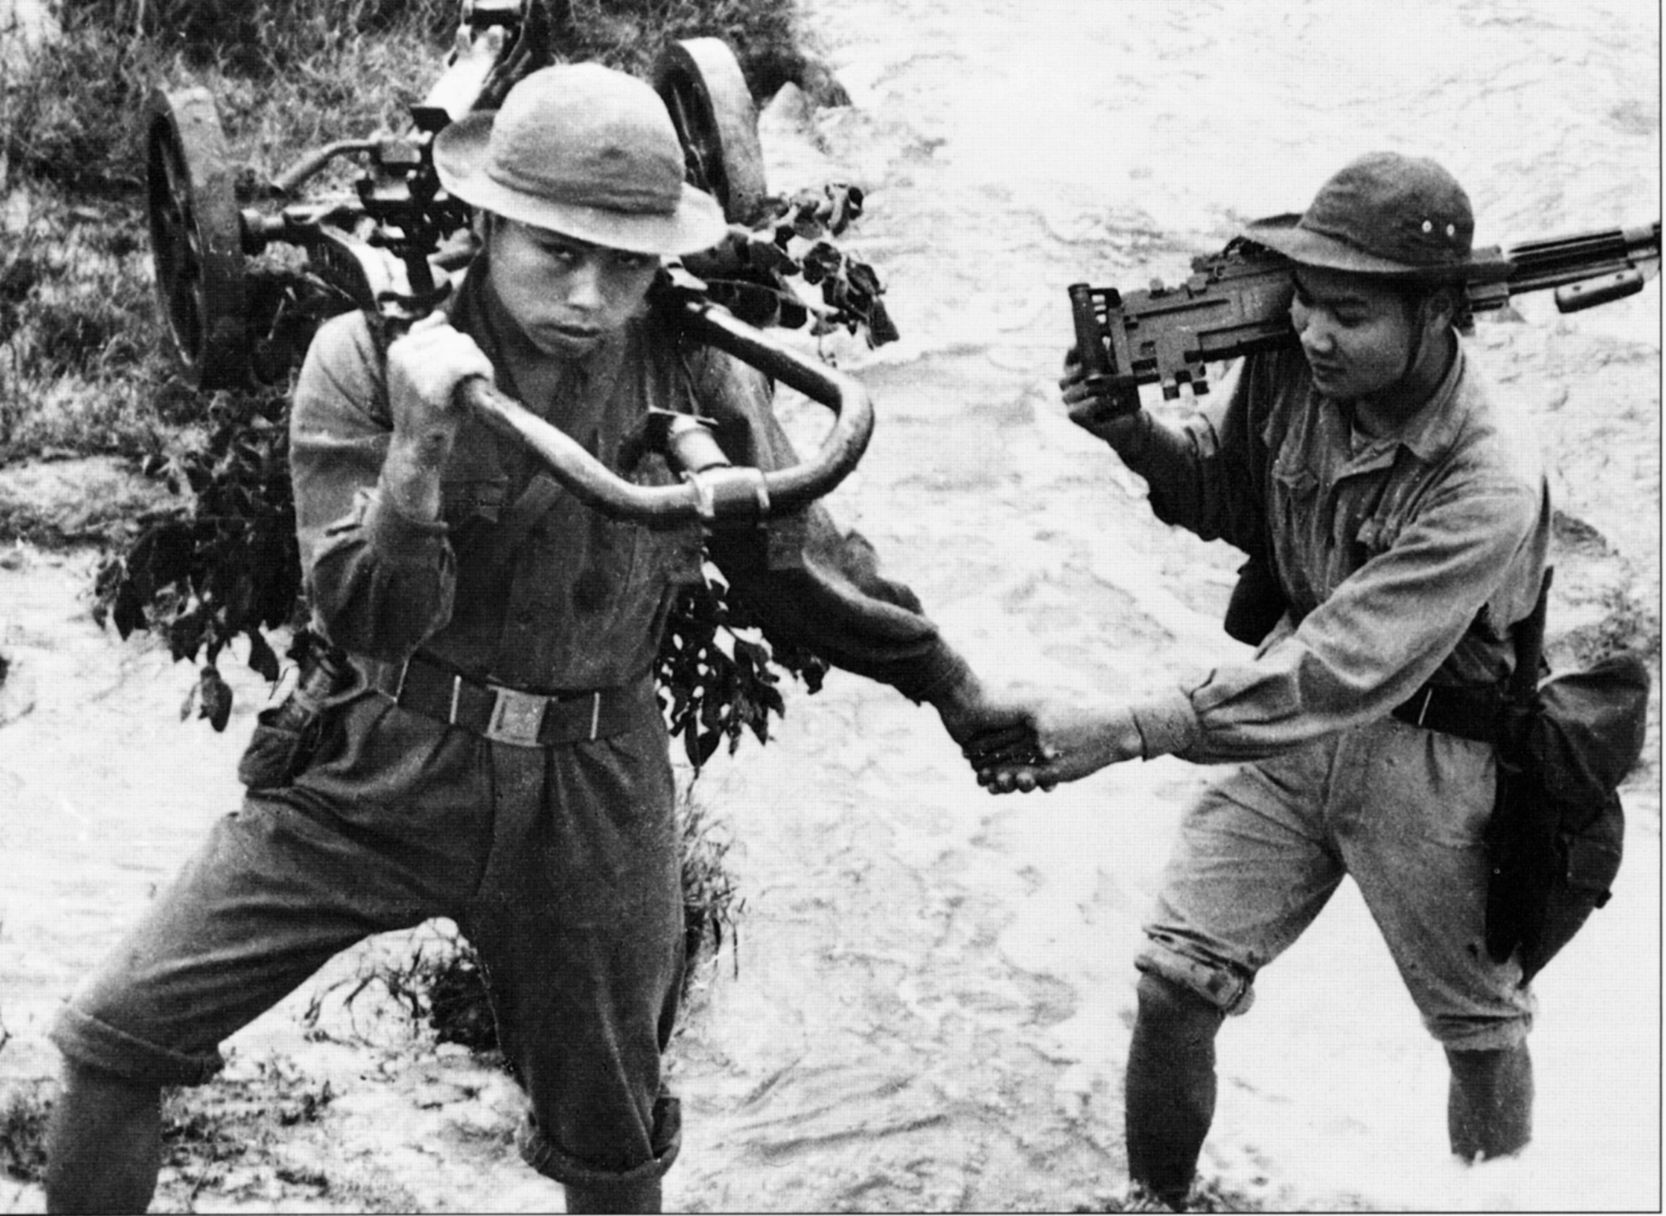 Two North Vietnamese regulars cross a river carrying their weapons on their back during the assault on Hue.
